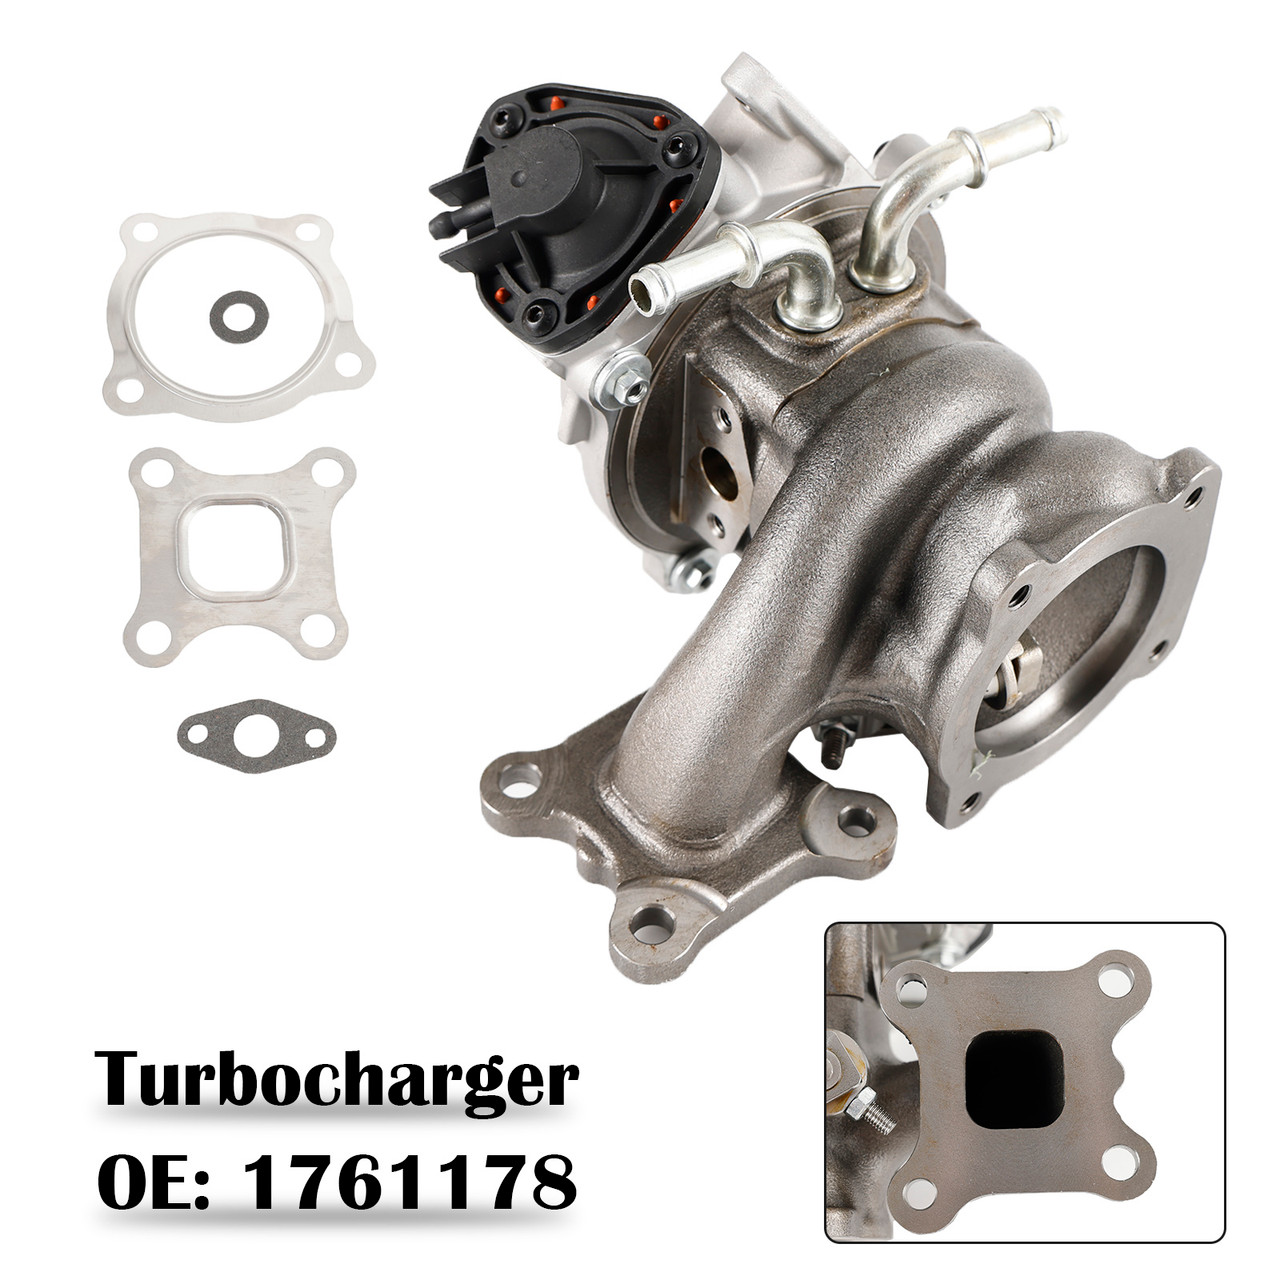 Turbo Turbocharger + Gaskets for Ford Fiesta Focus C-Max Transit 1.0L 1761178